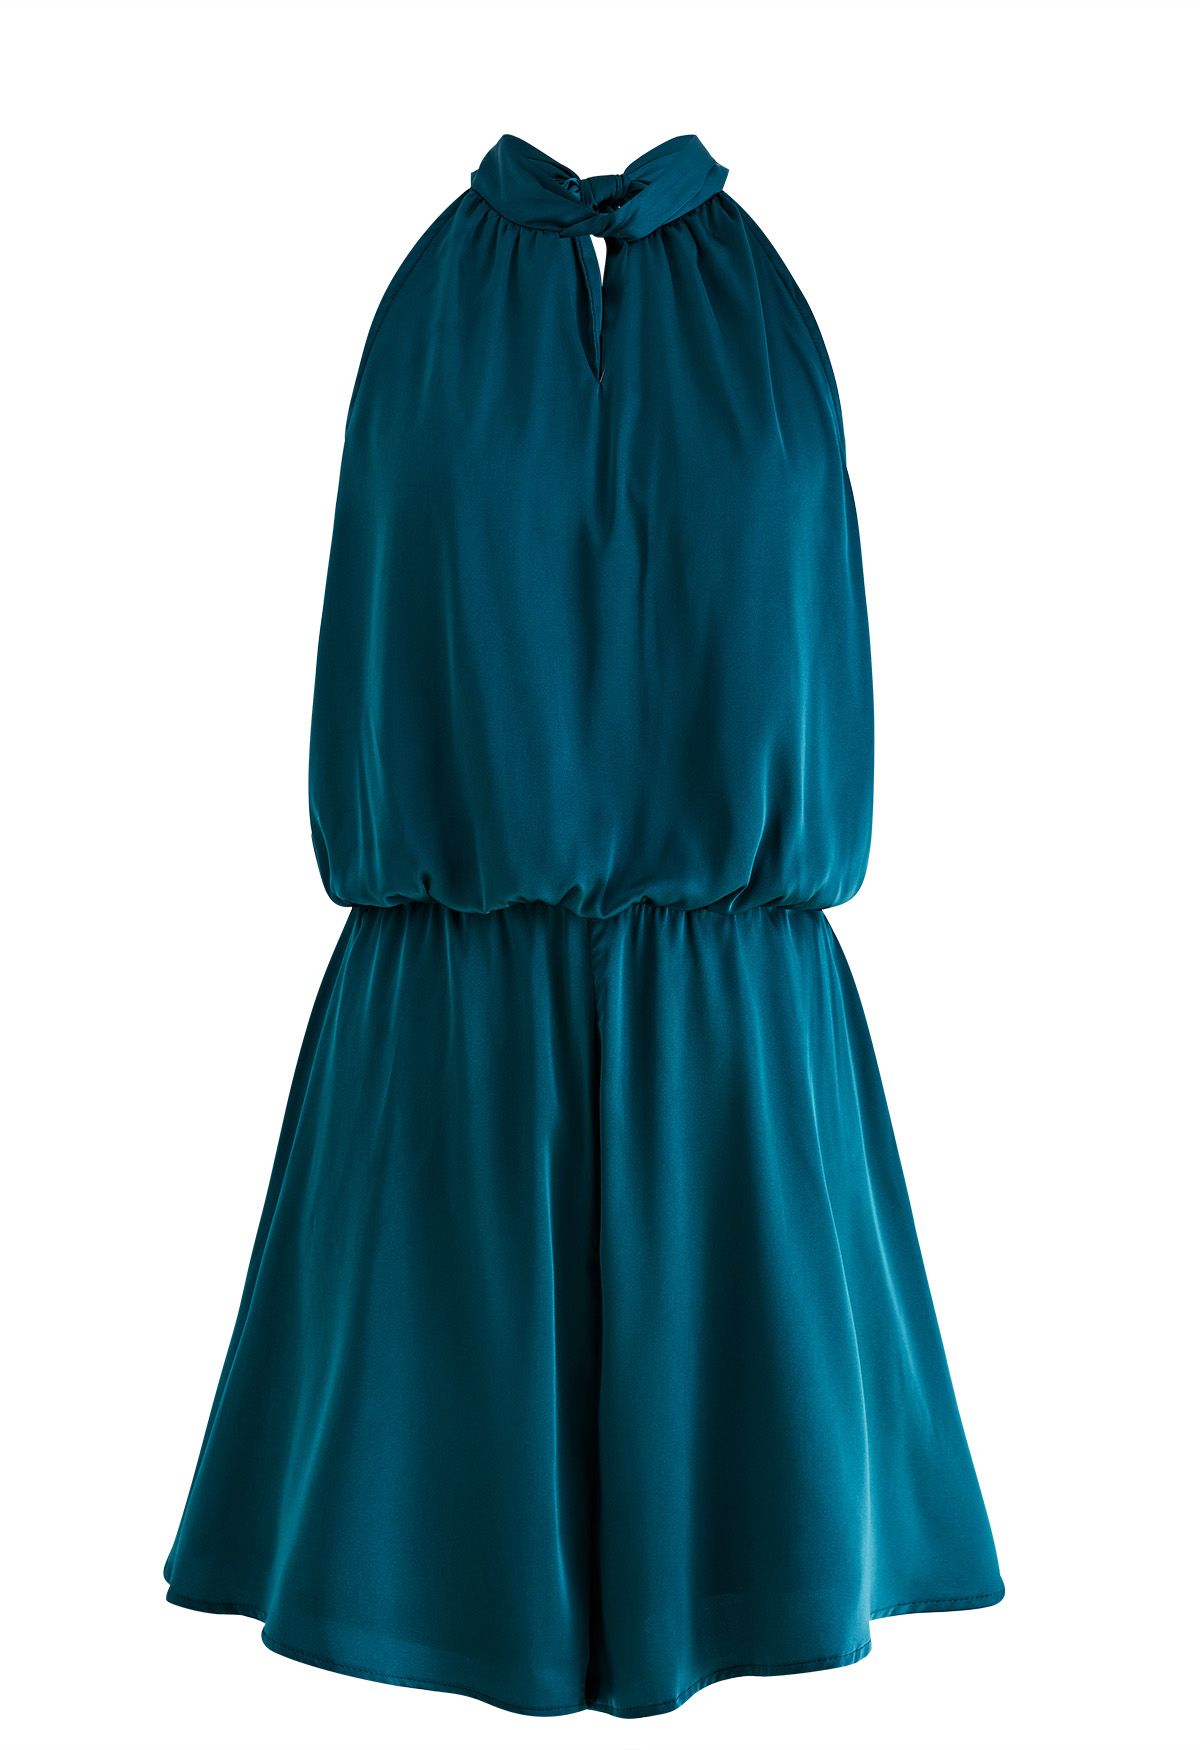 Halter Neck Cutout Satin Playsuit in Teal